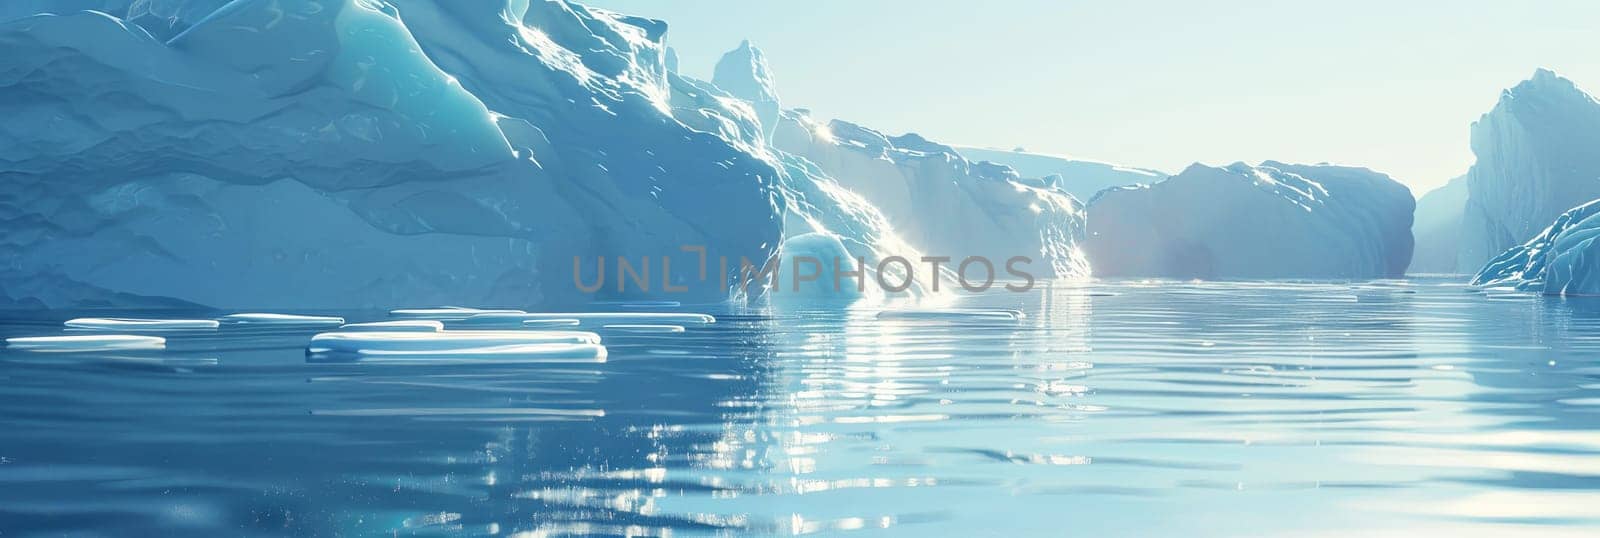 Multiple icebergs are seen floating on the cold Arctic waters, each displaying unique shapes and sizes.